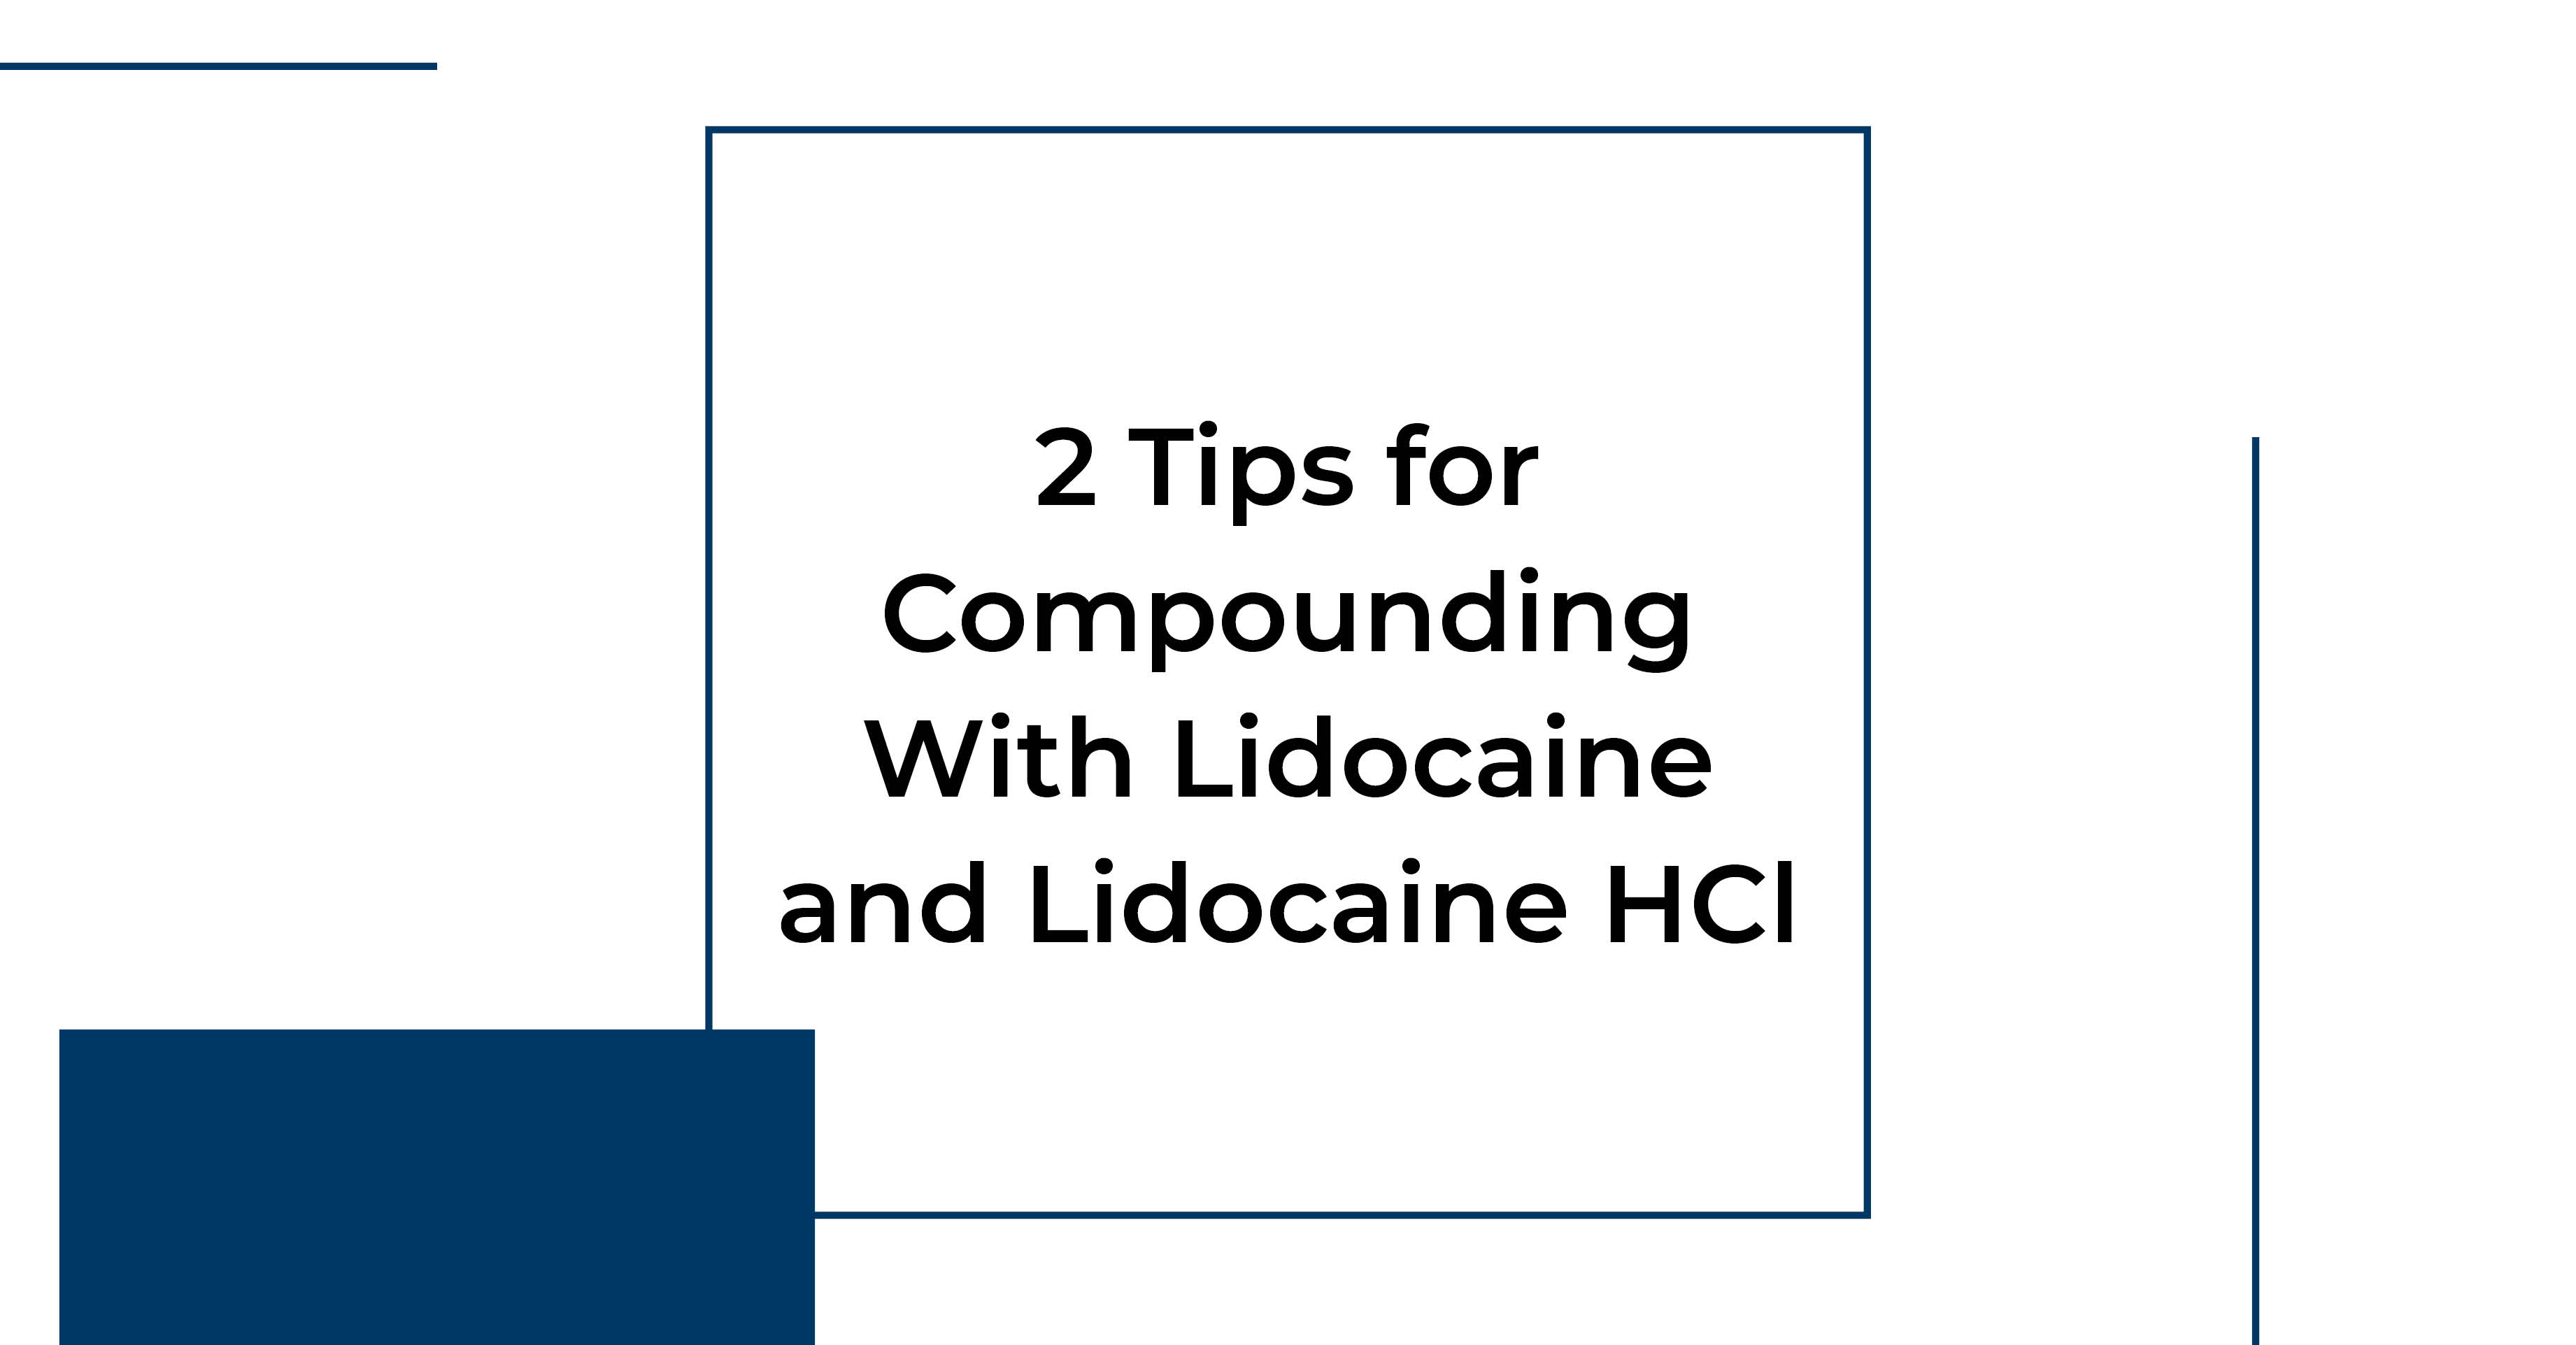 2 _tips_for_compounding_with_lidocaine_and_lidocaine_hcl.jpg